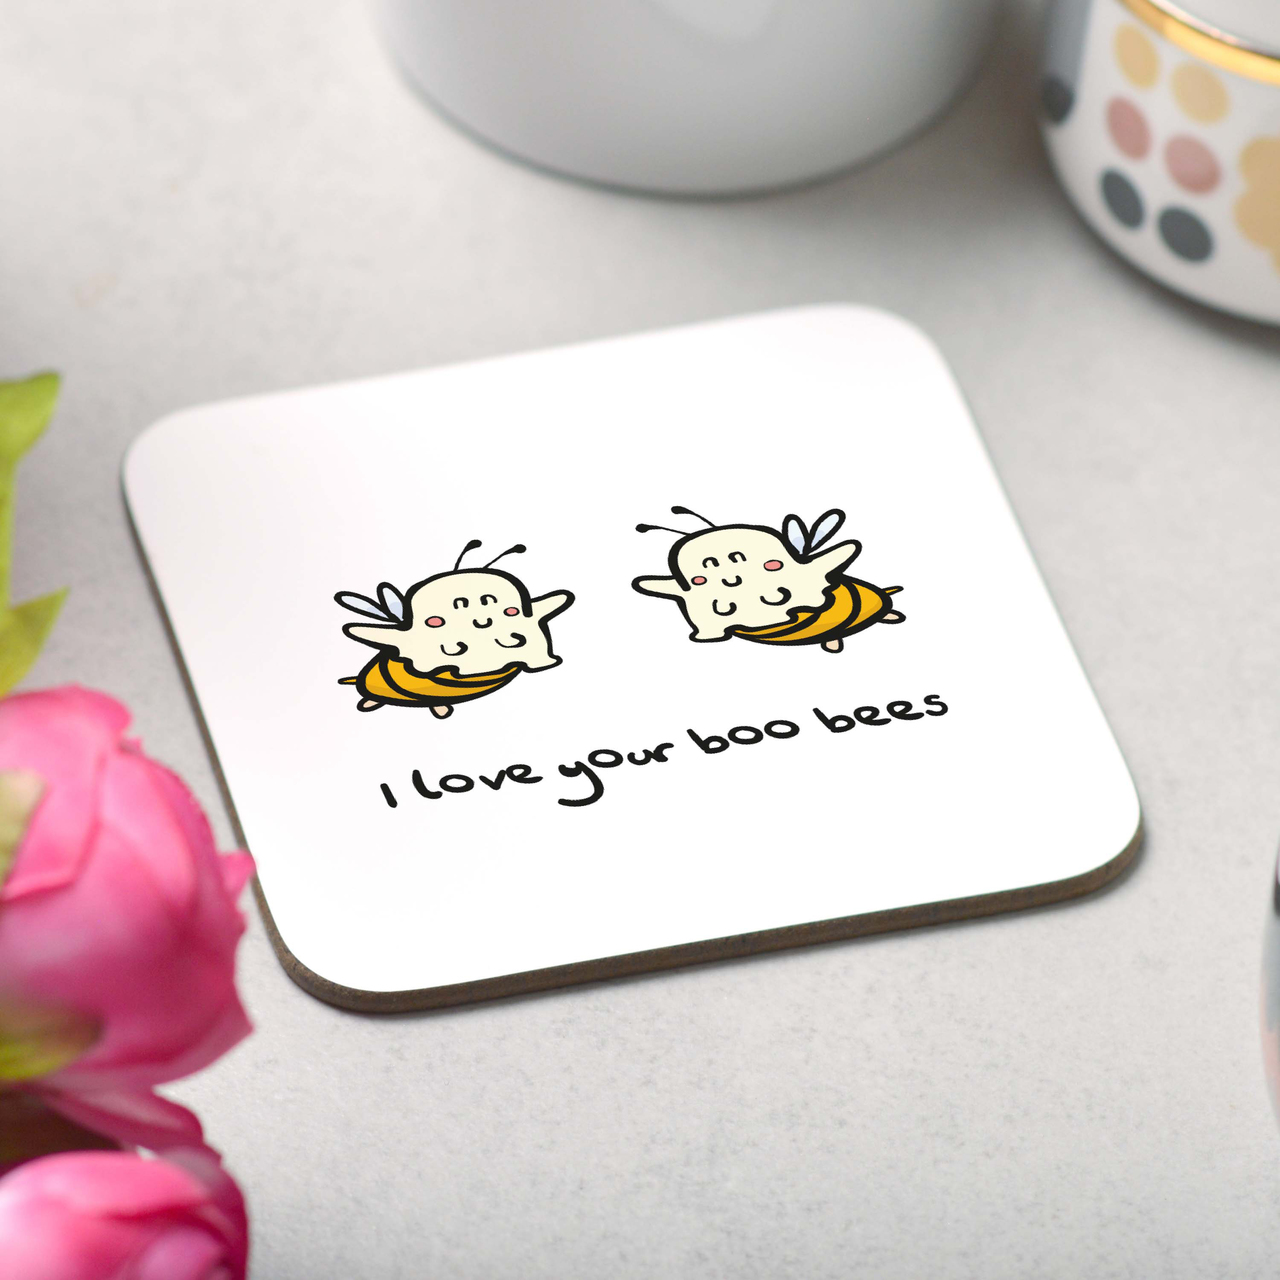 I love your boo bees Coaster